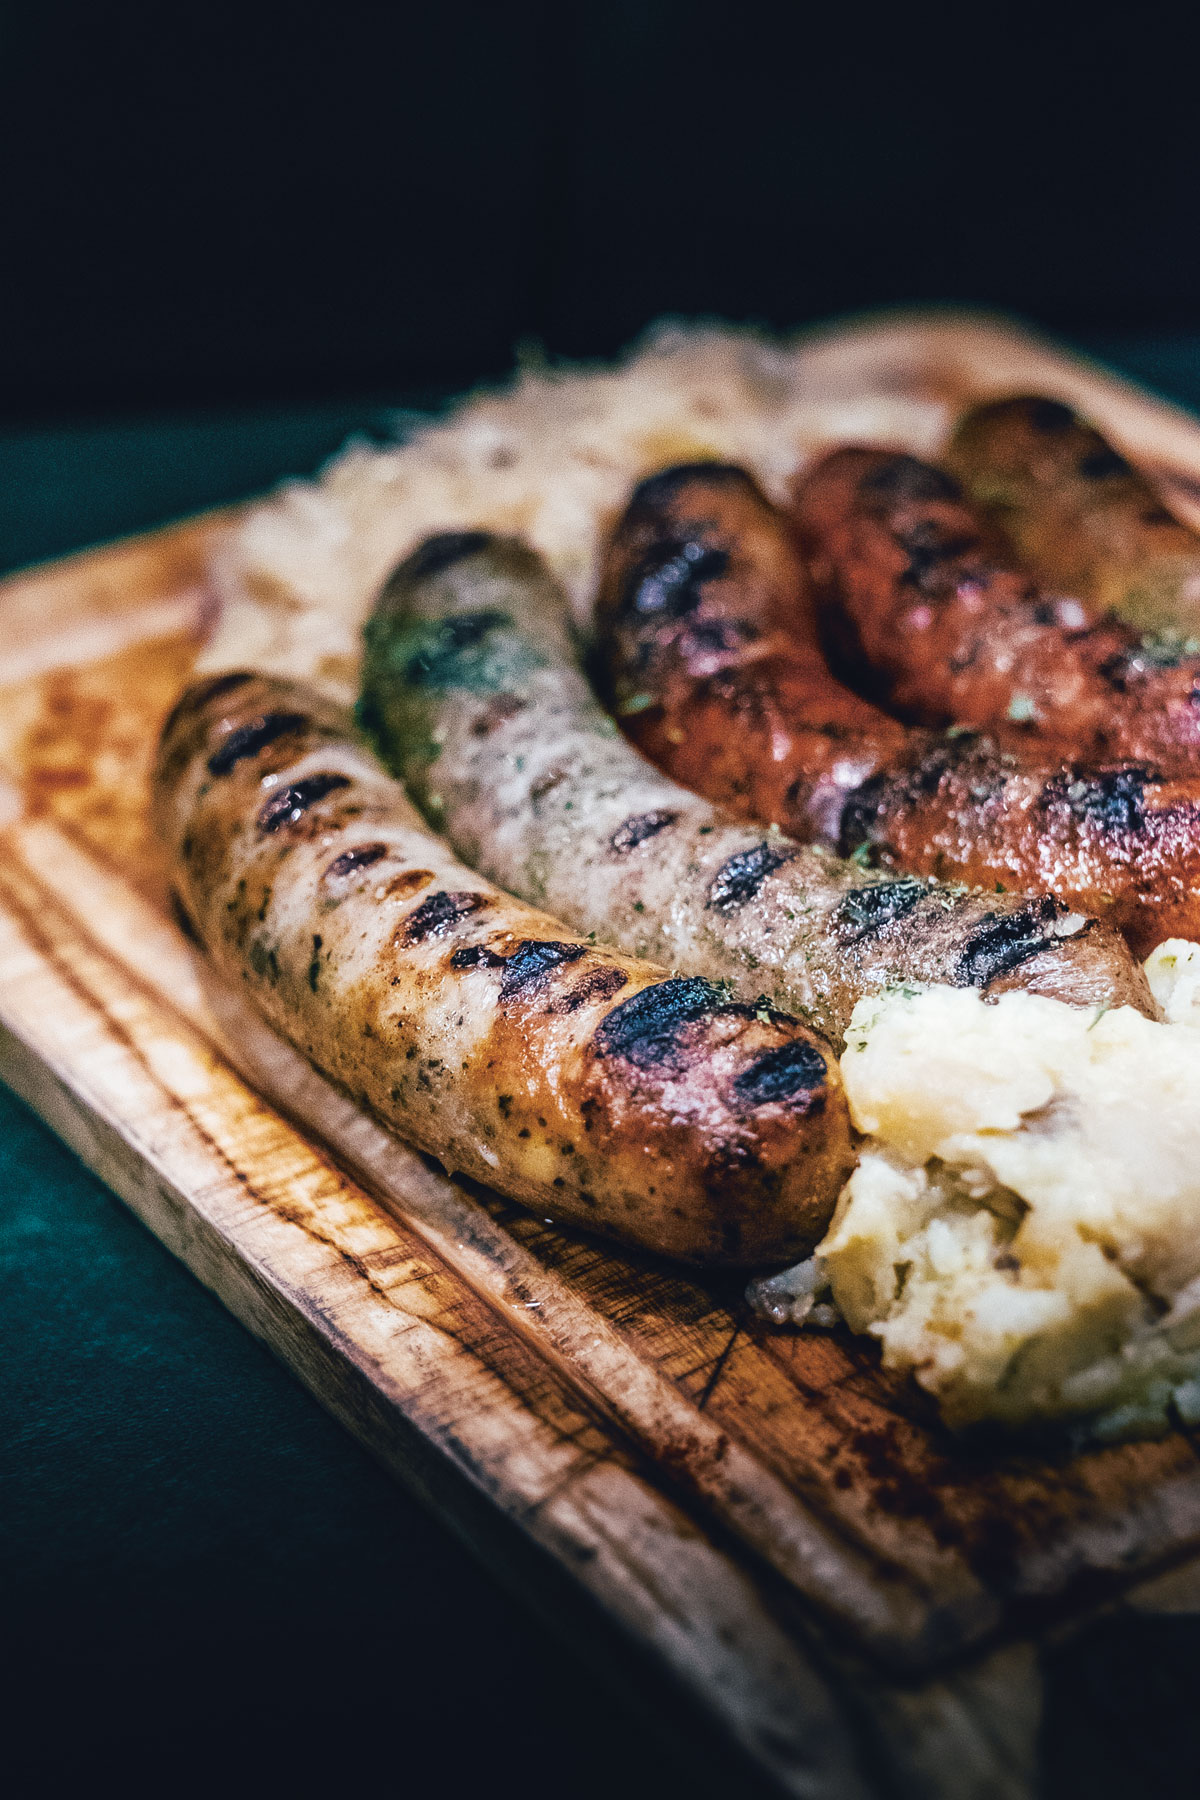 The sausages in Spice & Cleaver are divided into “traditional” and “artisanal”